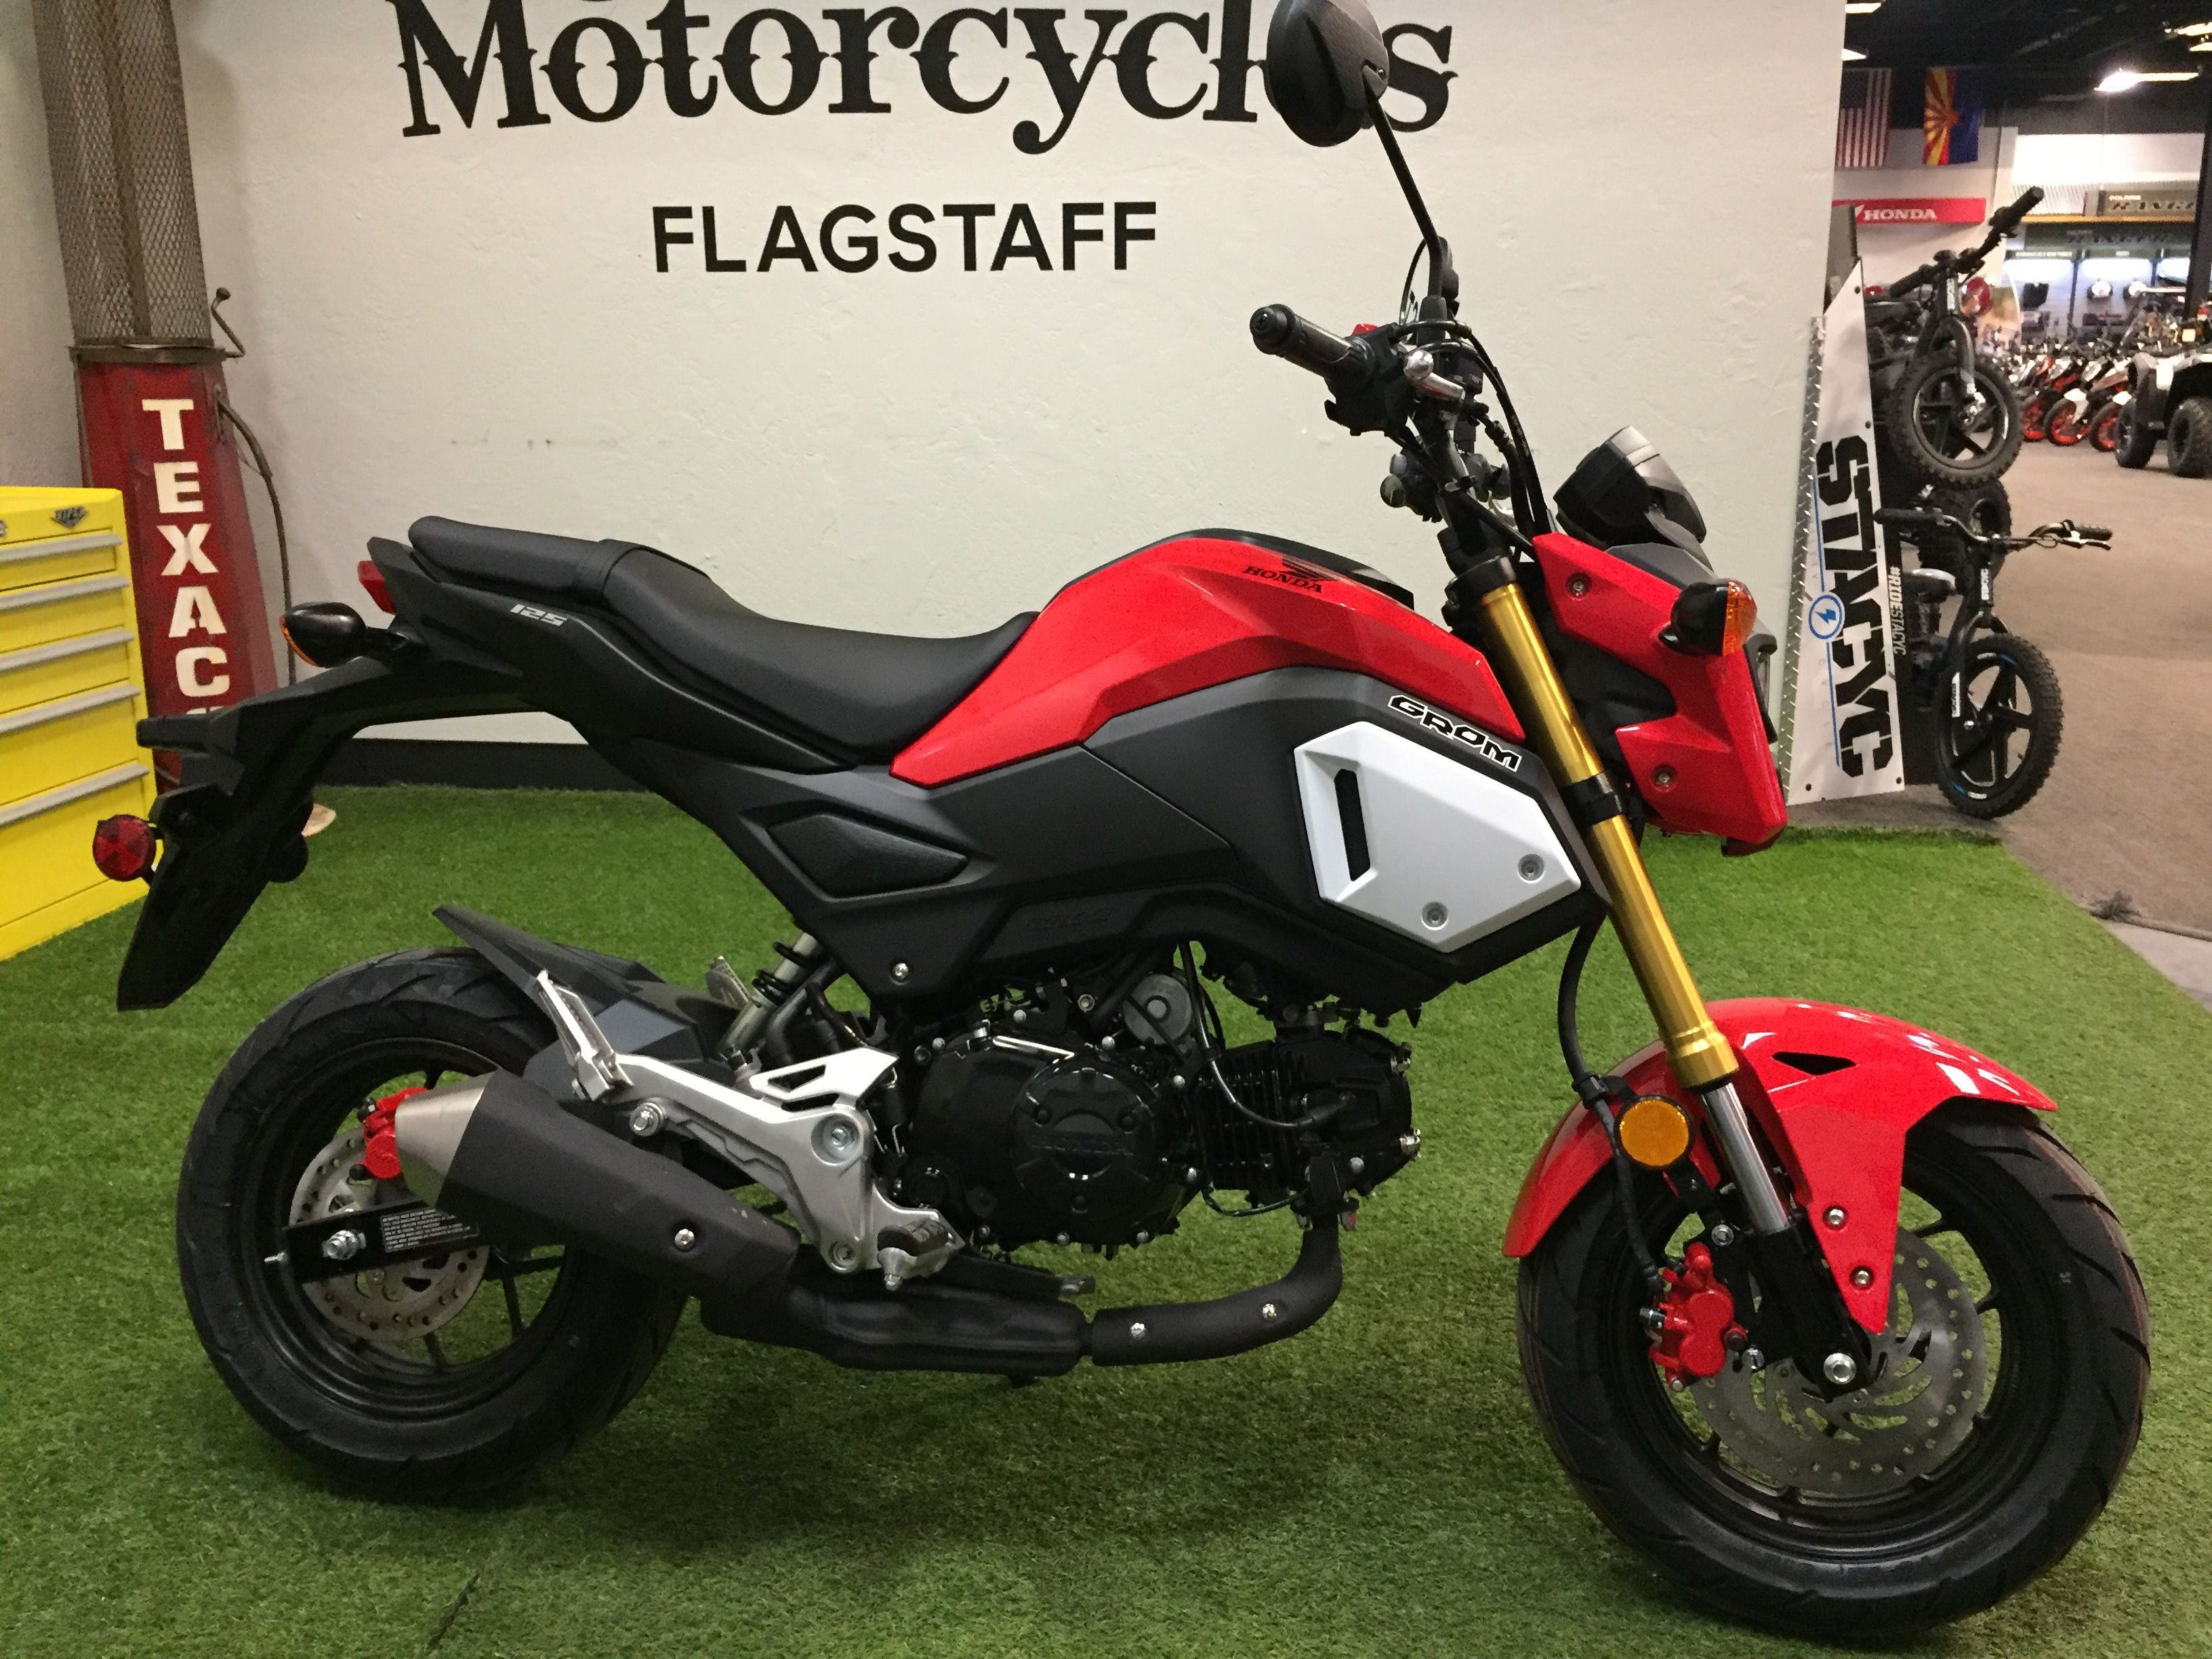 Red Honda Grom parked indoors